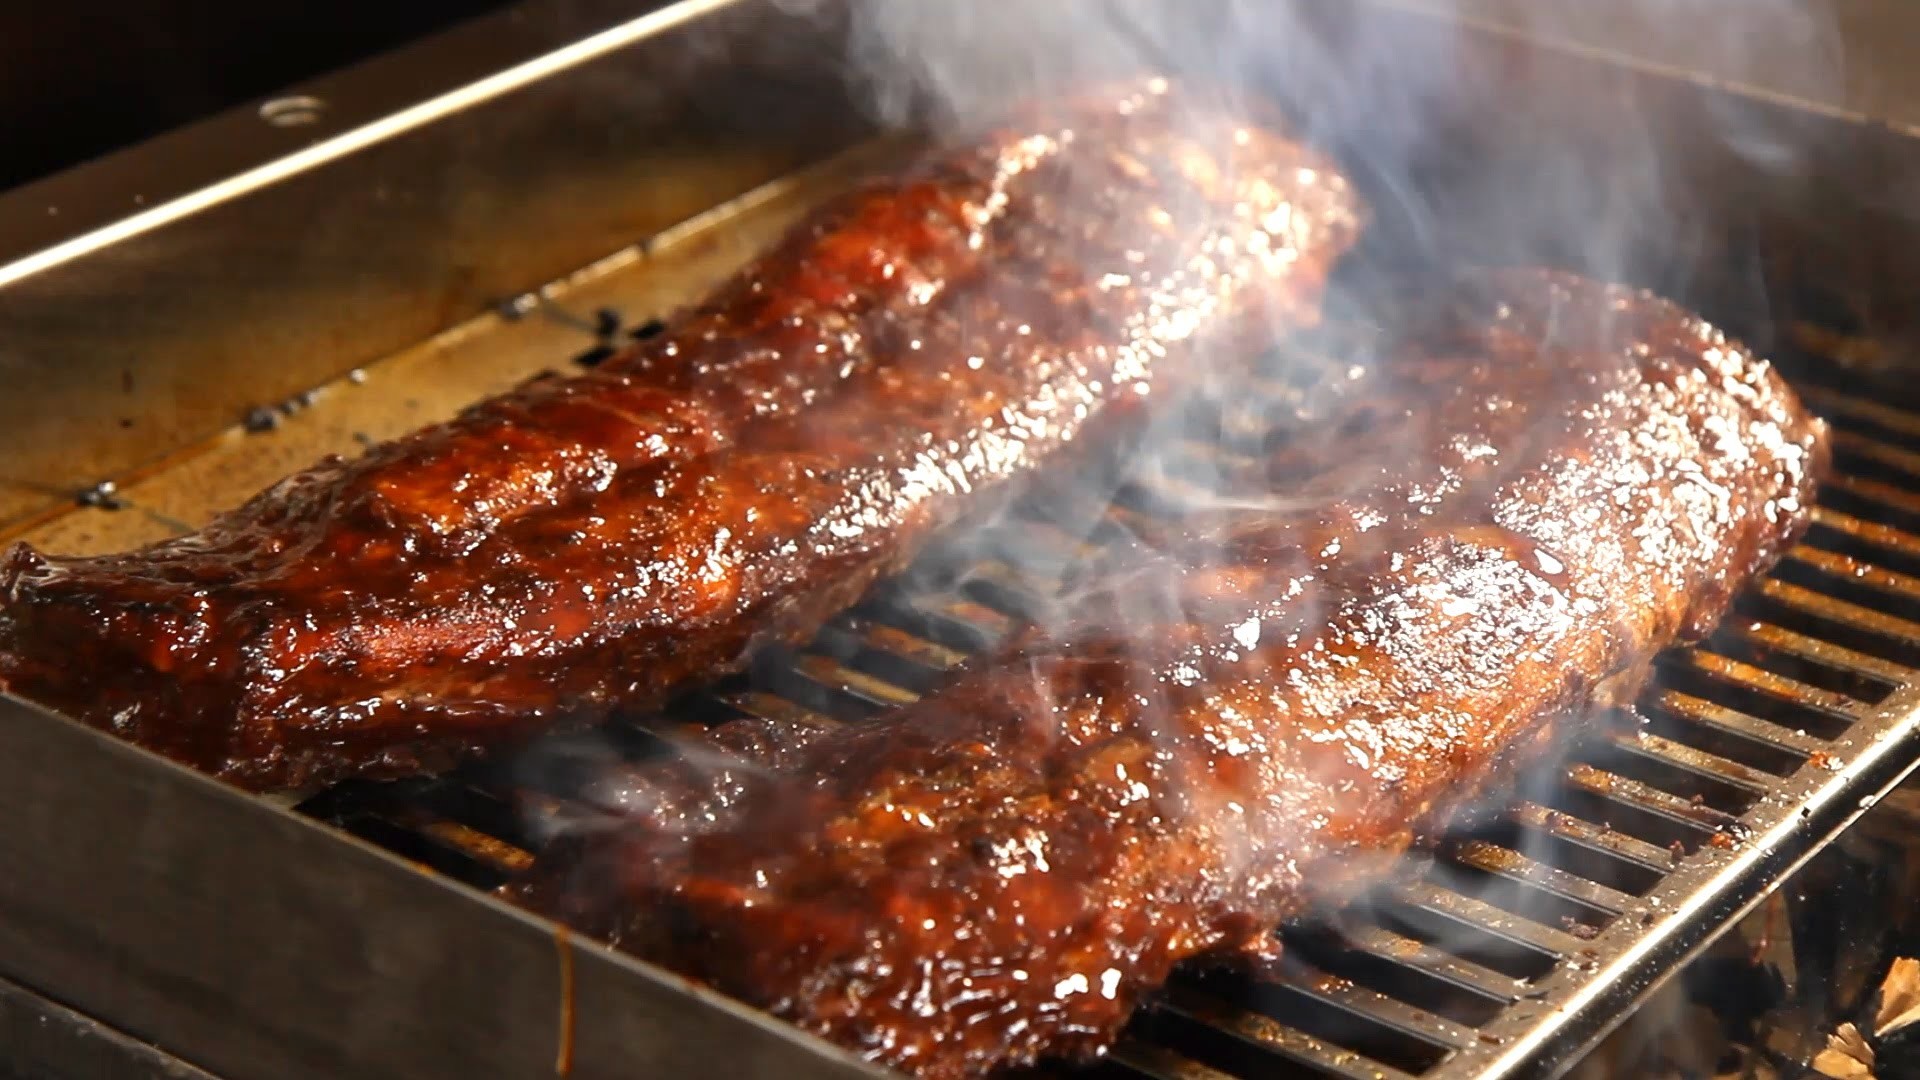 How to Smoke Ribs On the Tec Patio FR Infrared Gas Grill Smoker Rack | BBQGuys.com